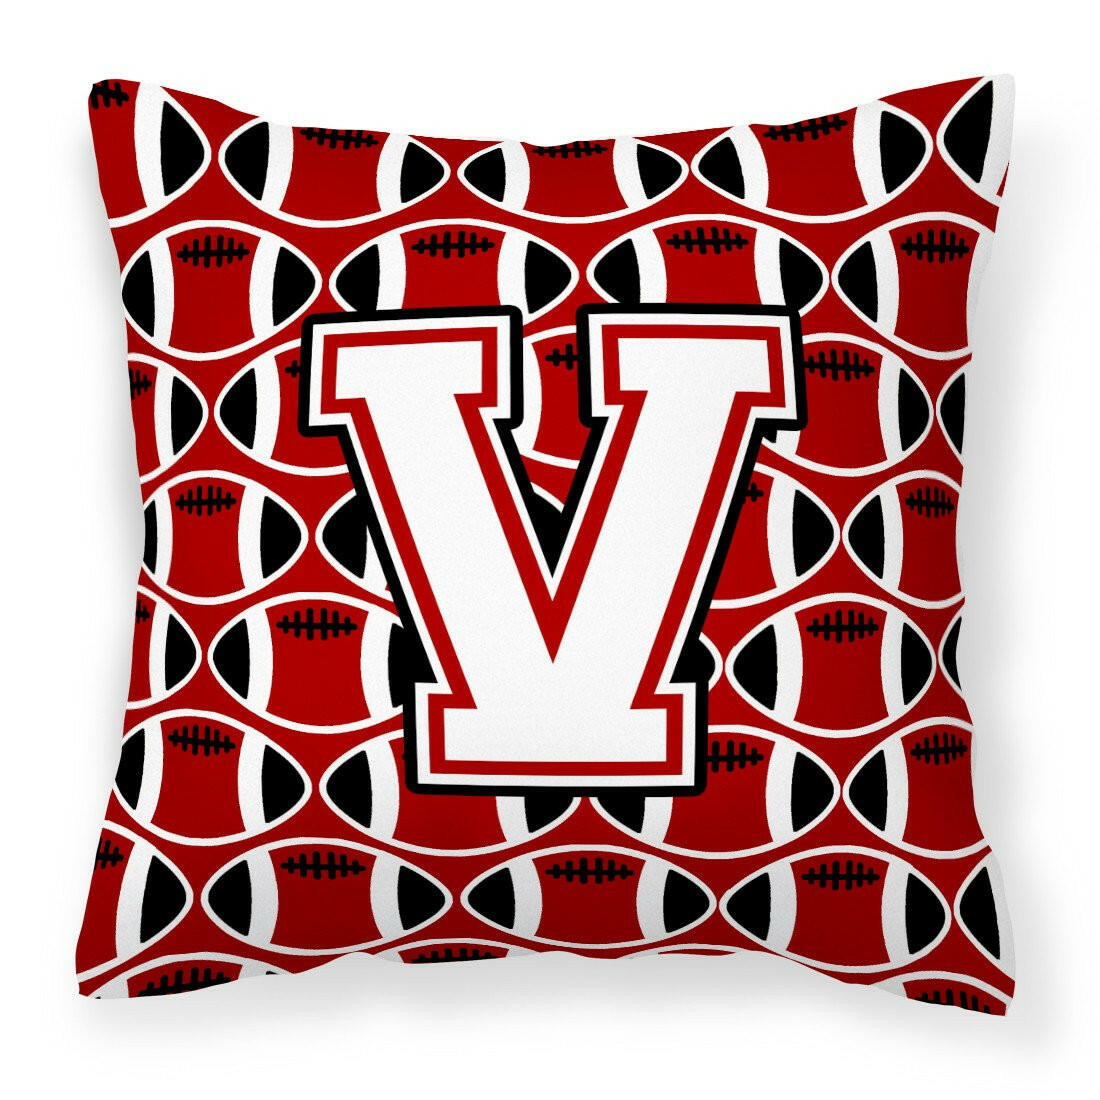 Letter V Football Cardinal and White Fabric Decorative Pillow CJ1082-VPW1414 by Caroline's Treasures